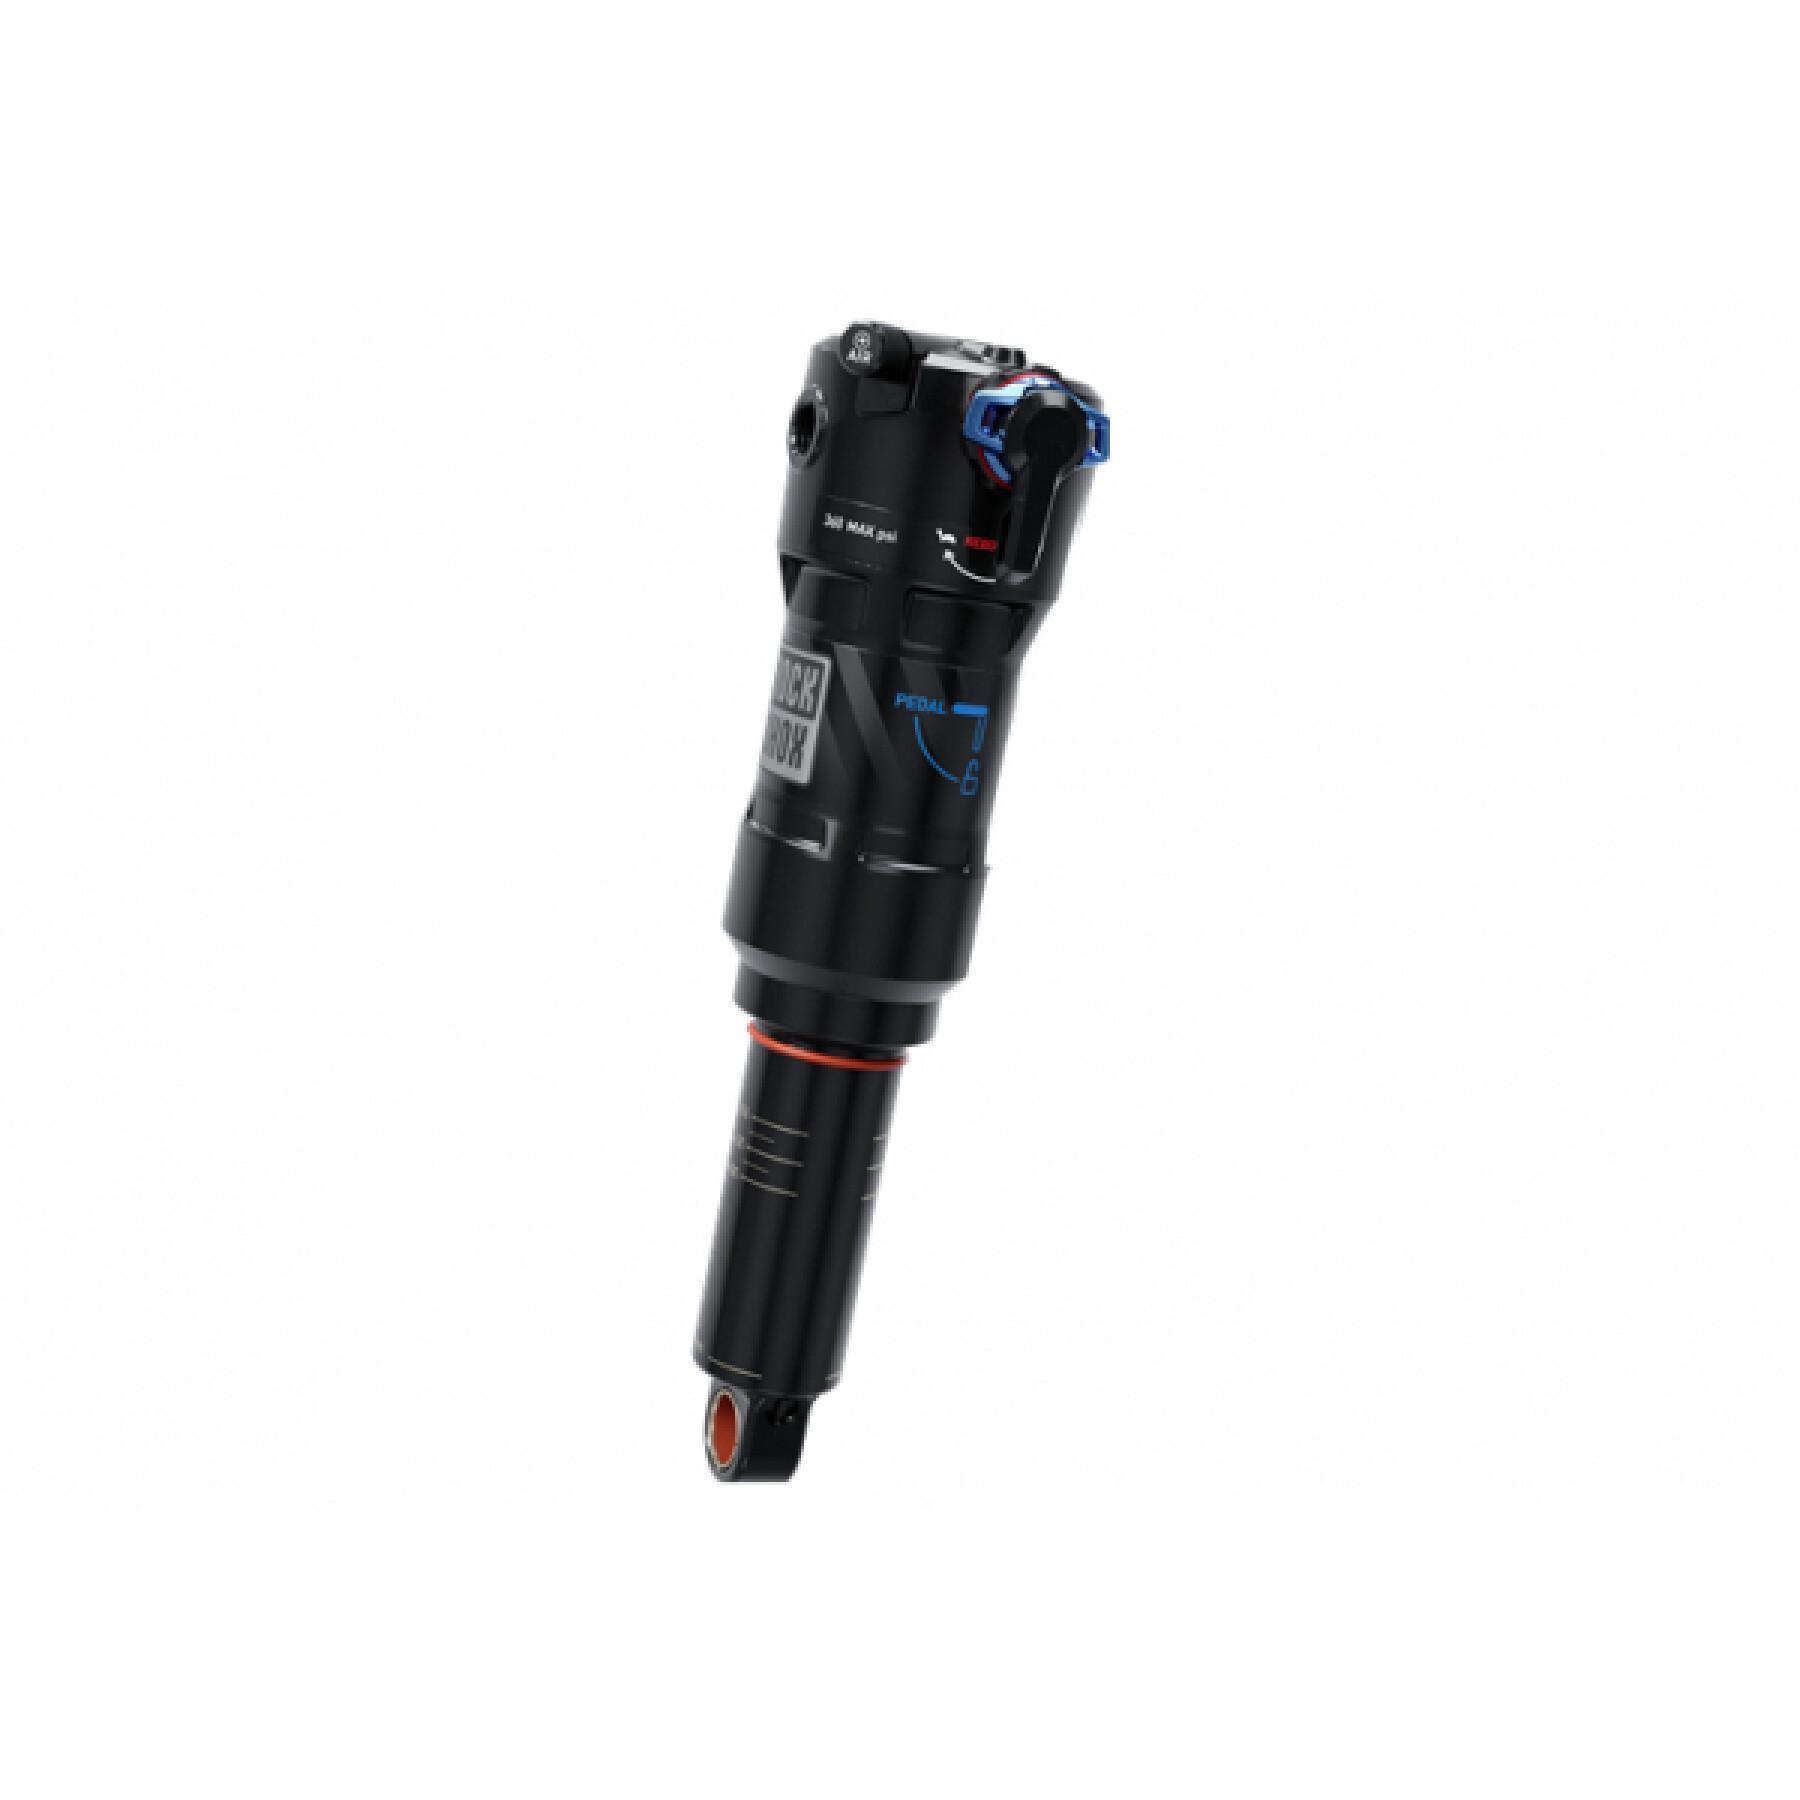 Amortecedor de choques Rockshox Deluxe Ultimate RCT Linear Air Lockout Force 230 x 57.5 mm